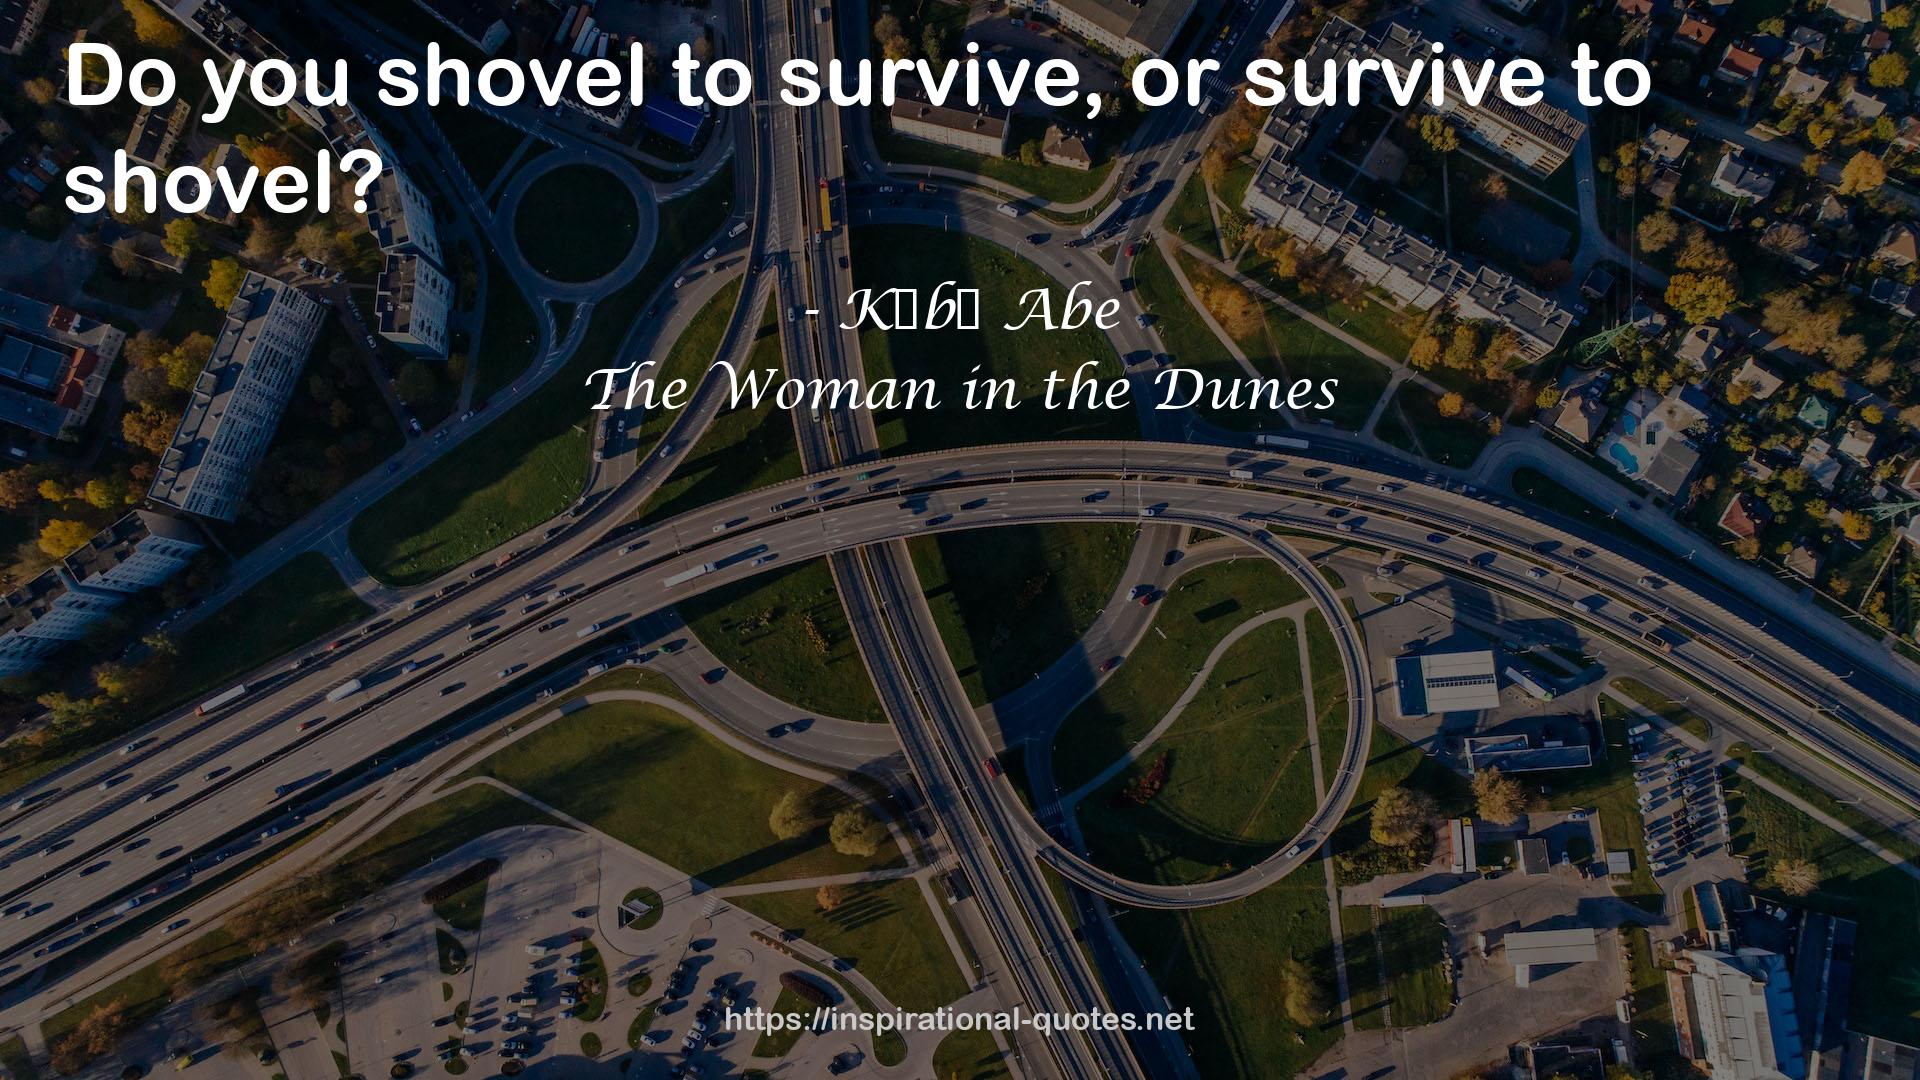 The Woman in the Dunes QUOTES